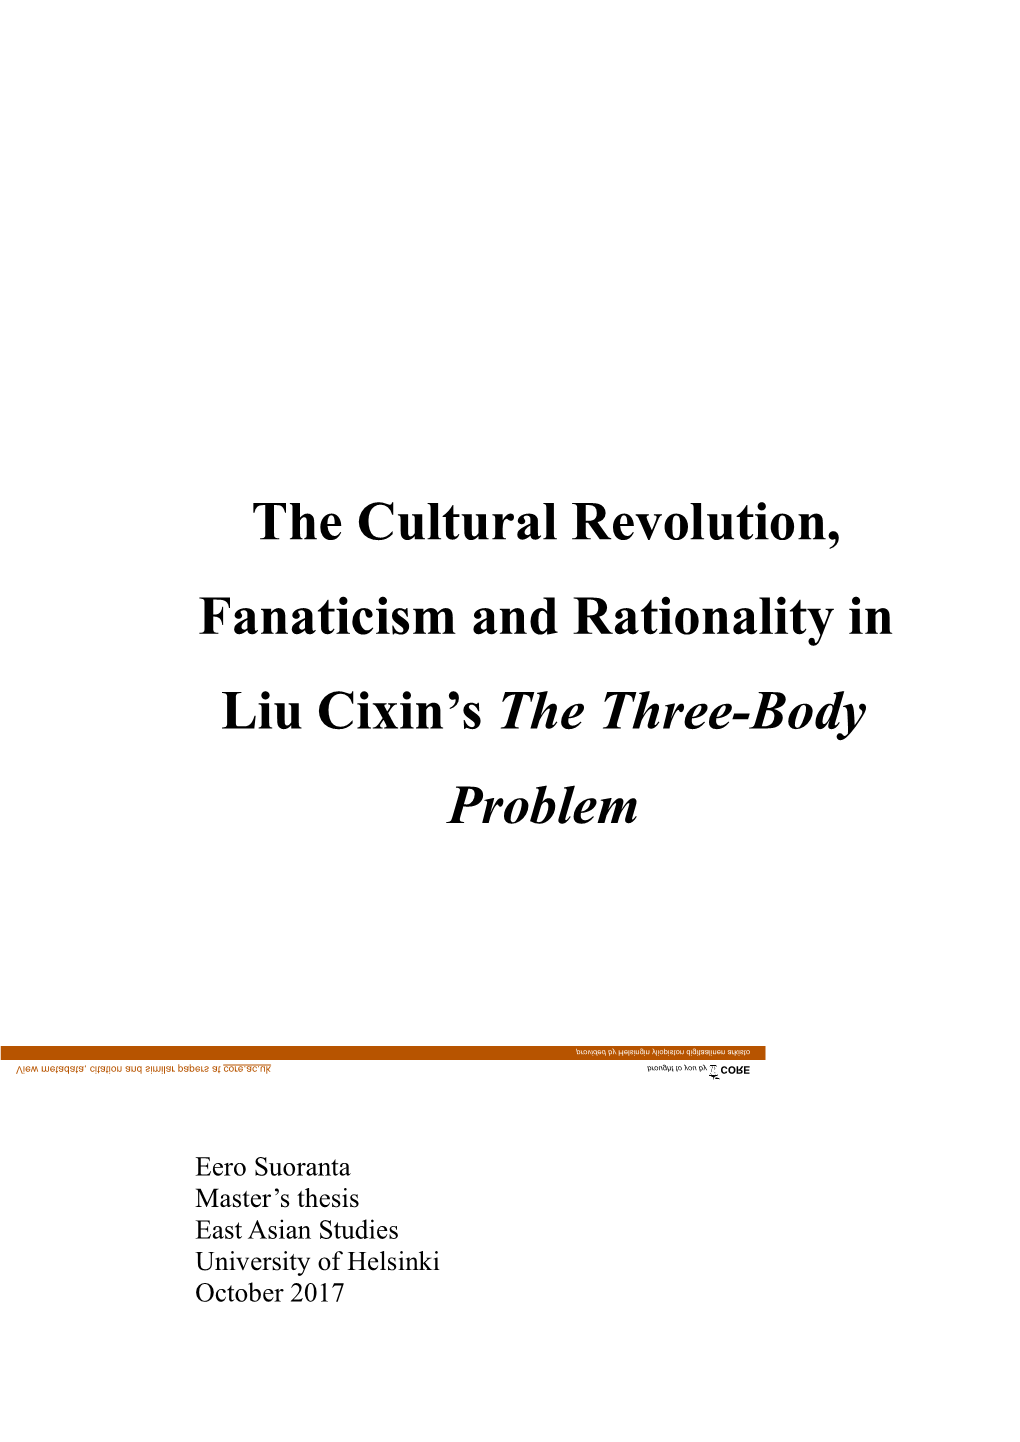 The Cultural Revolution, Fanaticism and Rationality in Liu Cixin’S the Three-Body